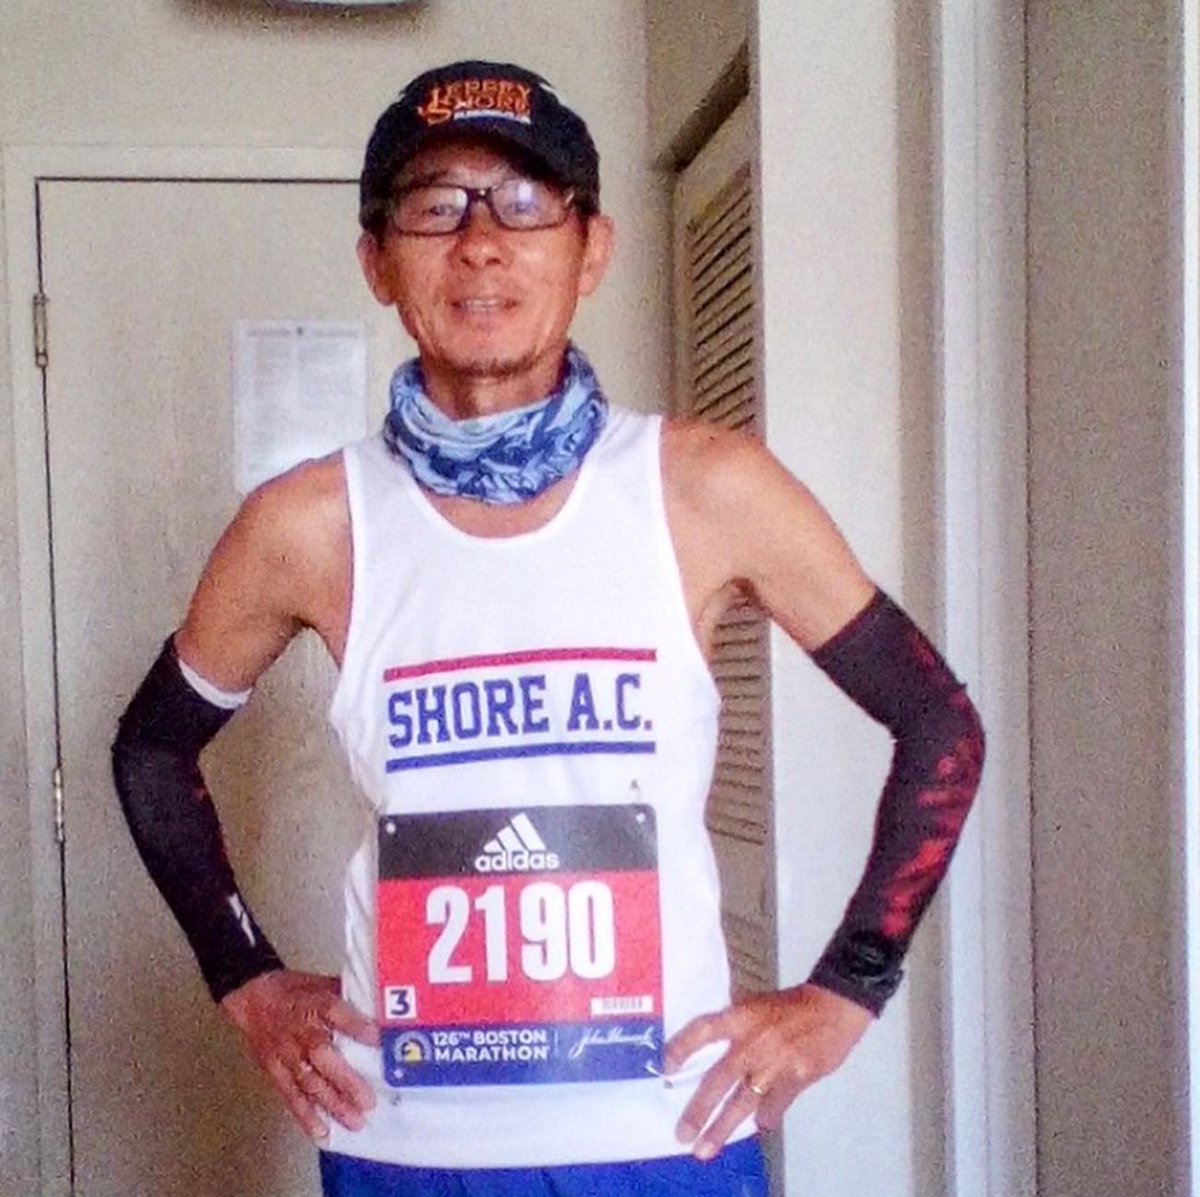 We had 8 athletes shining bright for @TheShoreAC at this year’s @bostonmarathon. Among the awesome performances in Boston was a win in the 60-64 age group from Rick Lee, as he ran 2:47:58. That’d be 6:25 per mile pace…for 26.2 rolling miles…at age 60. #BostonMagic #incredible